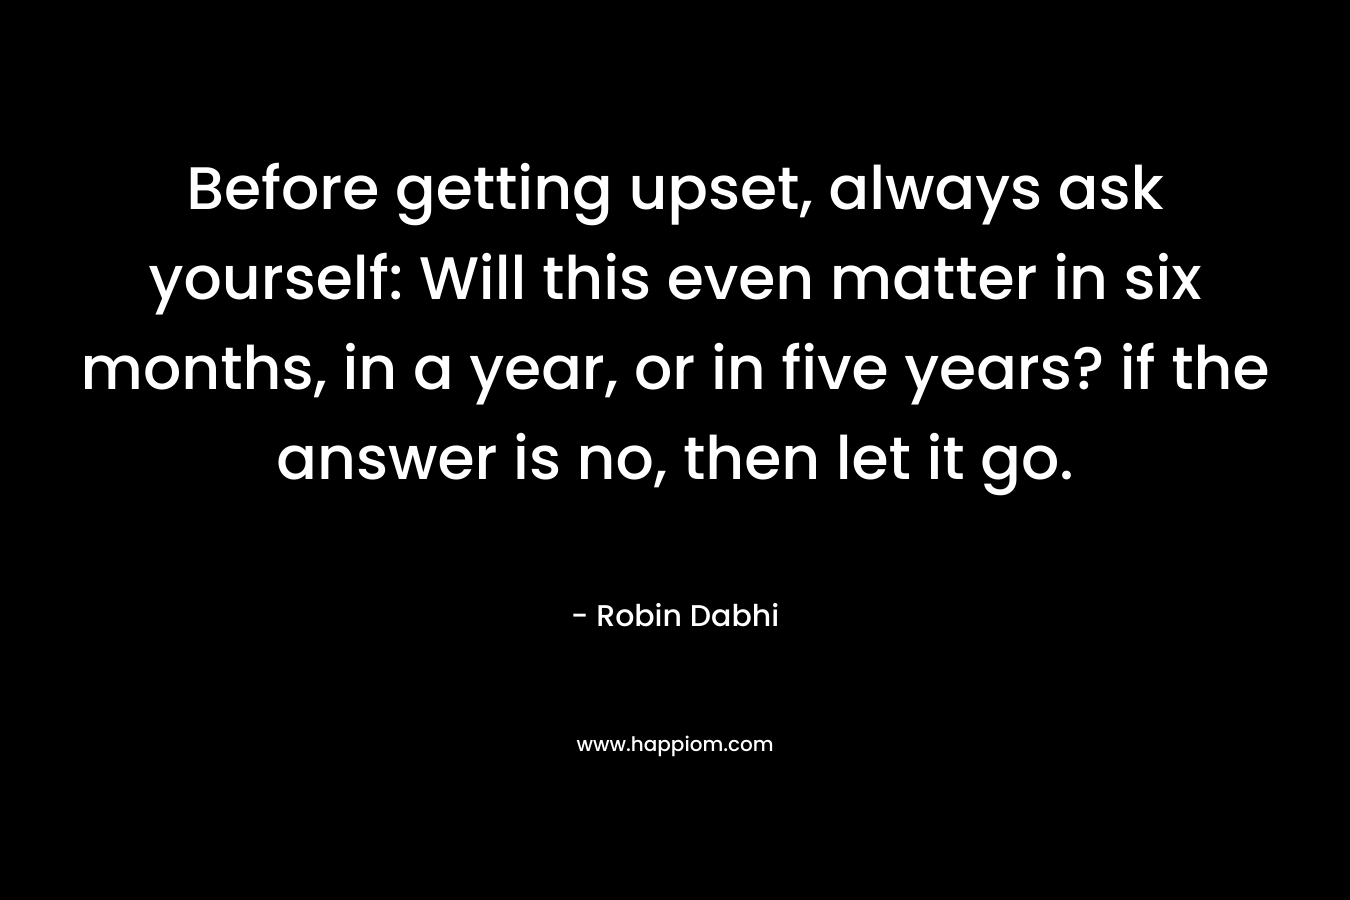 Before getting upset, always ask yourself: Will this even matter in six months, in a year, or in five years? if the answer is no, then let it go.